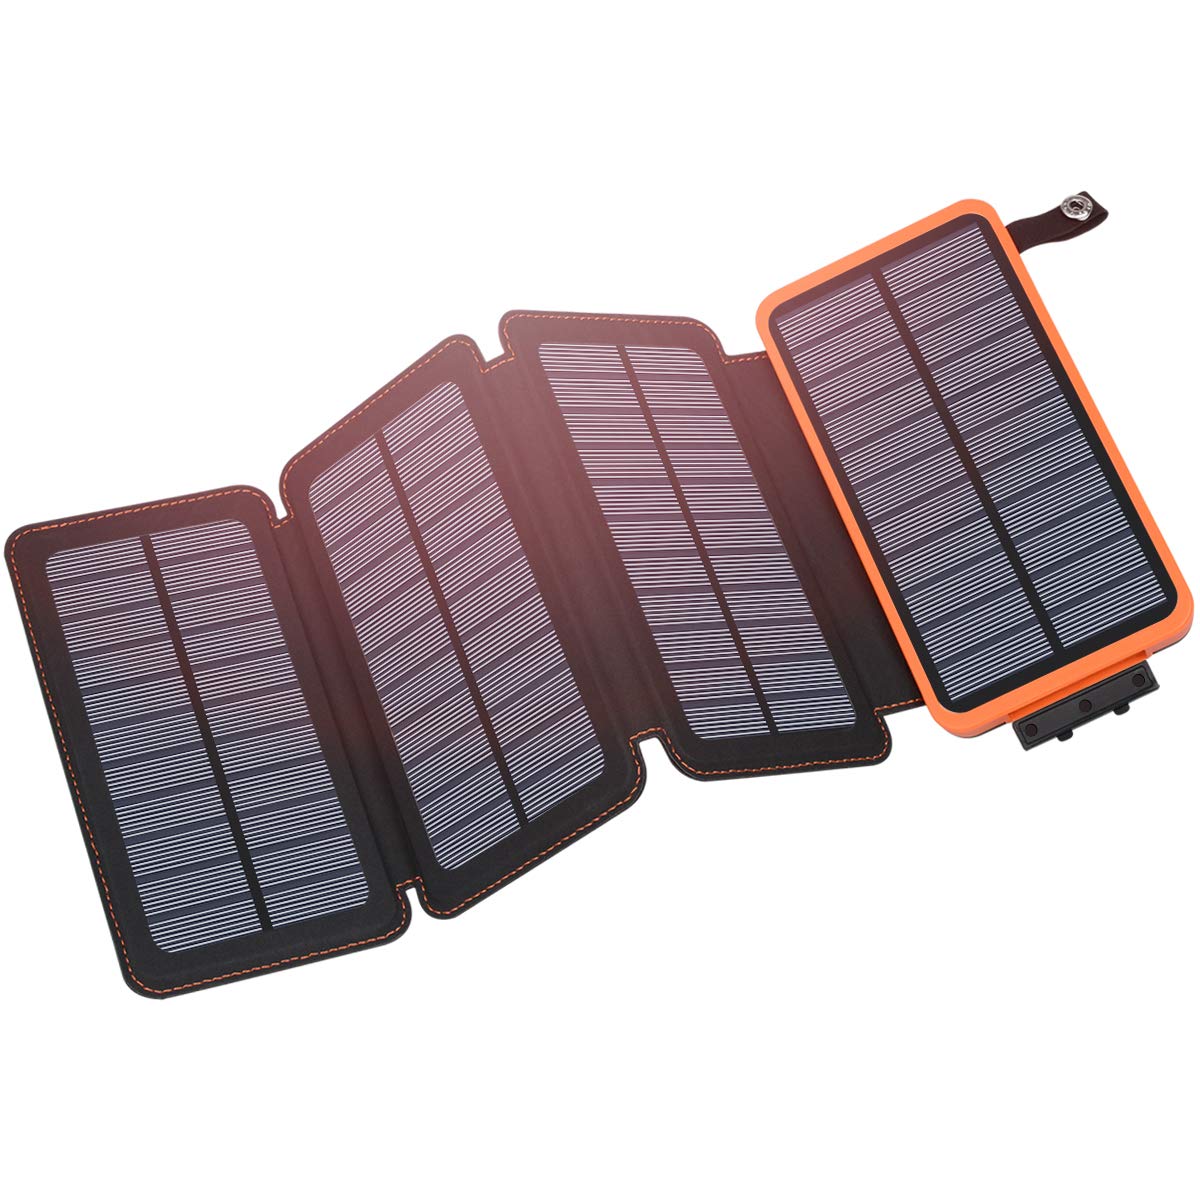 Hiluckey Solar Charger